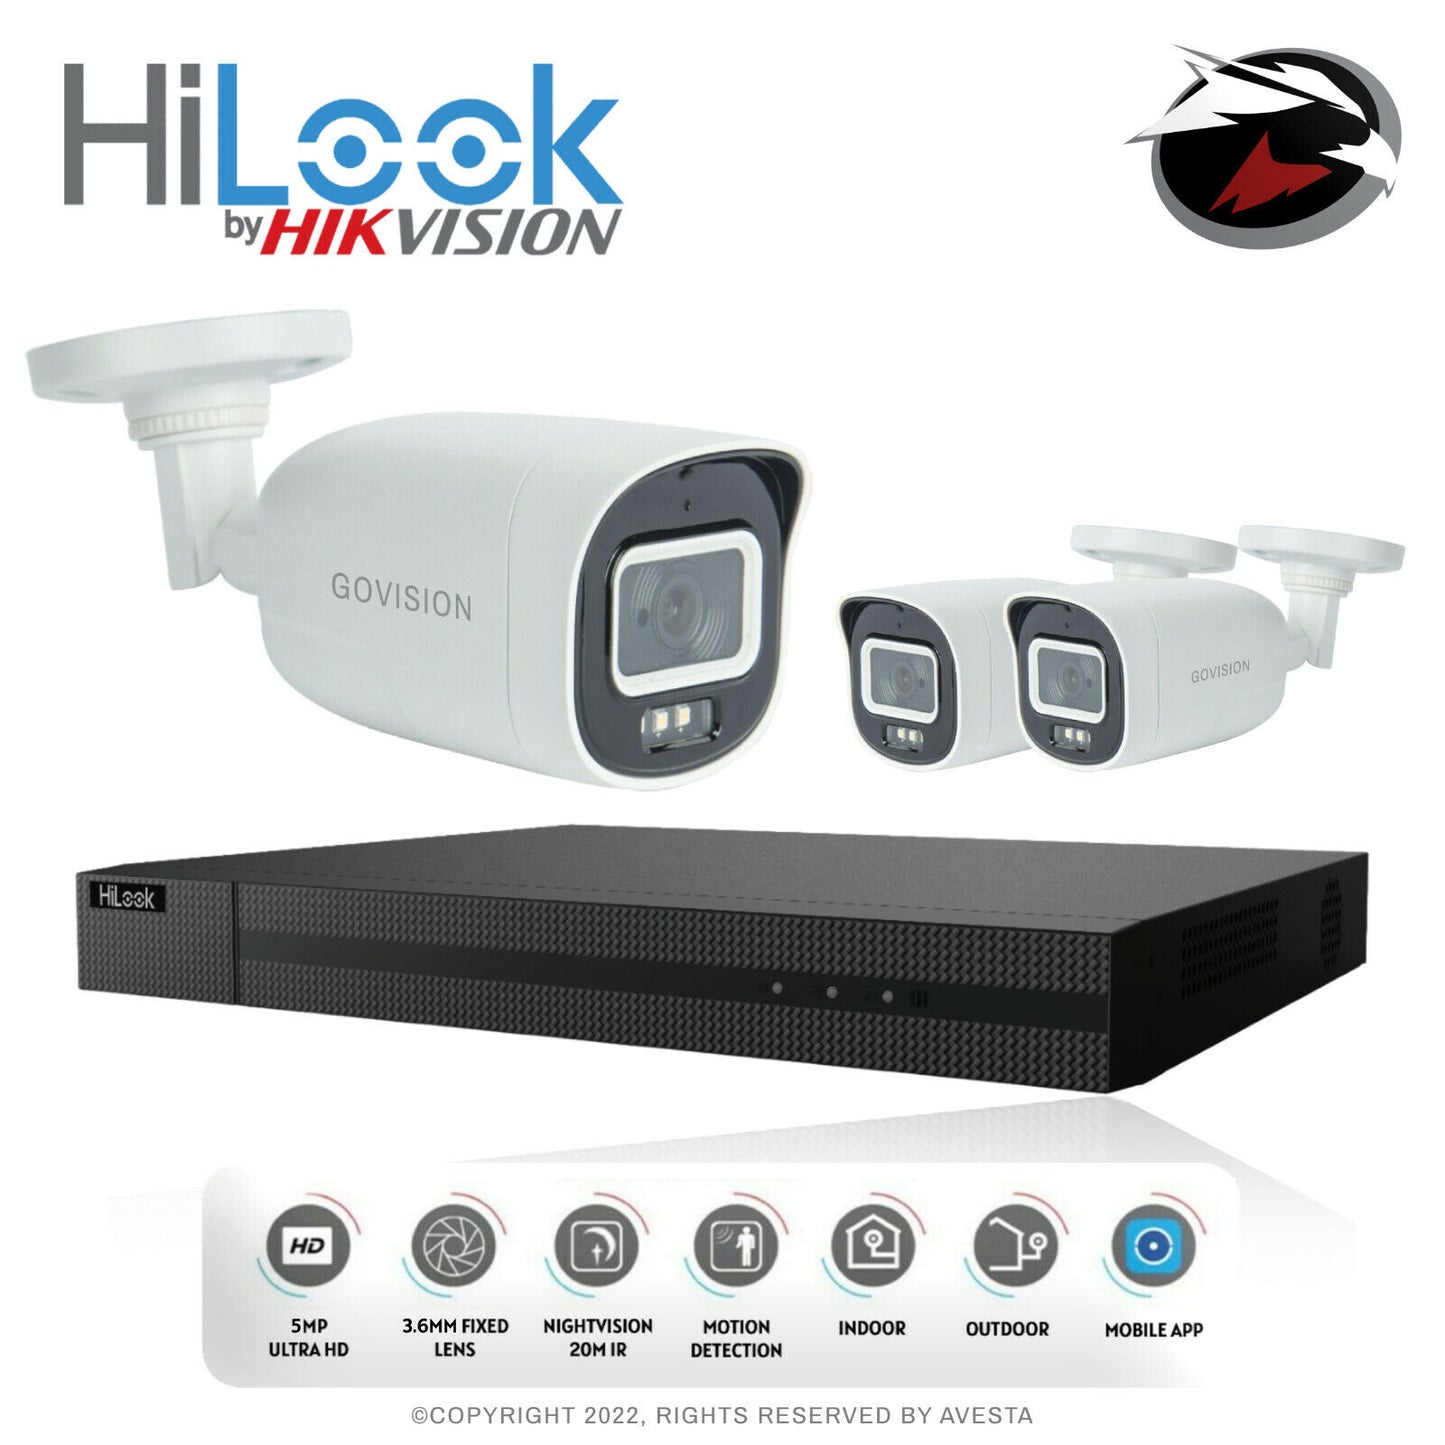 HIKVISION HILOOK 5MP CCTV SYSTEM DVR UHD 24/7 HOURS COLORFUL NIGHTVISION CAMERA 4CH DVR 3xCameras (white) 2TB HDD